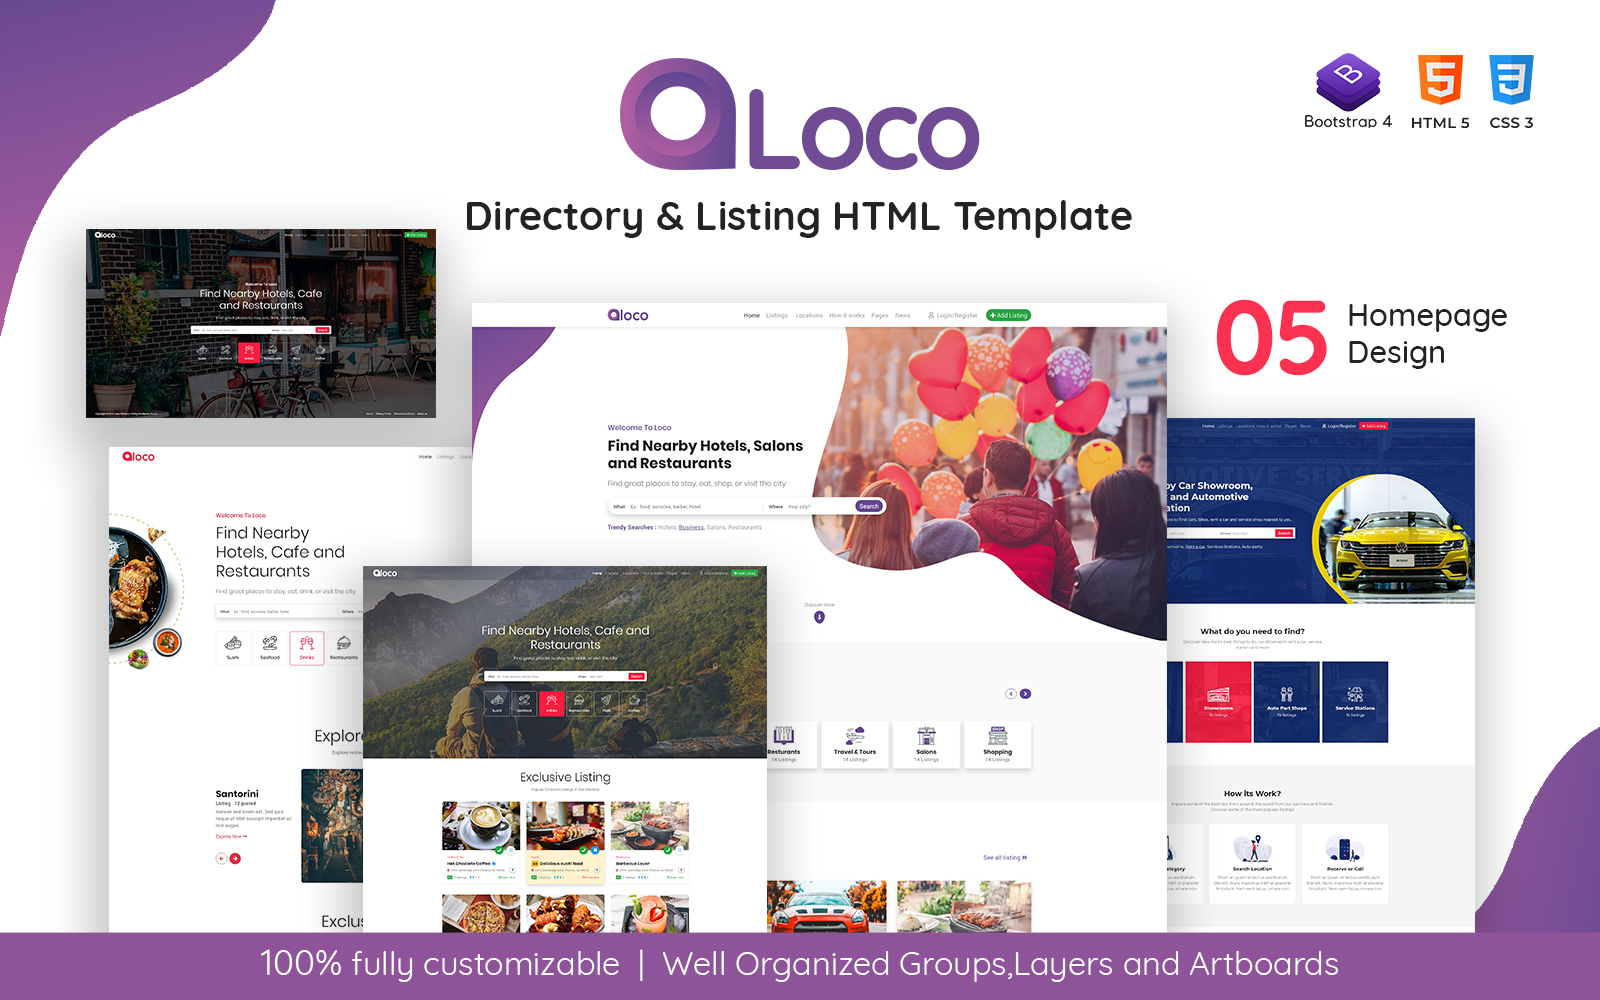 Loco - Directory Listing HTML Template